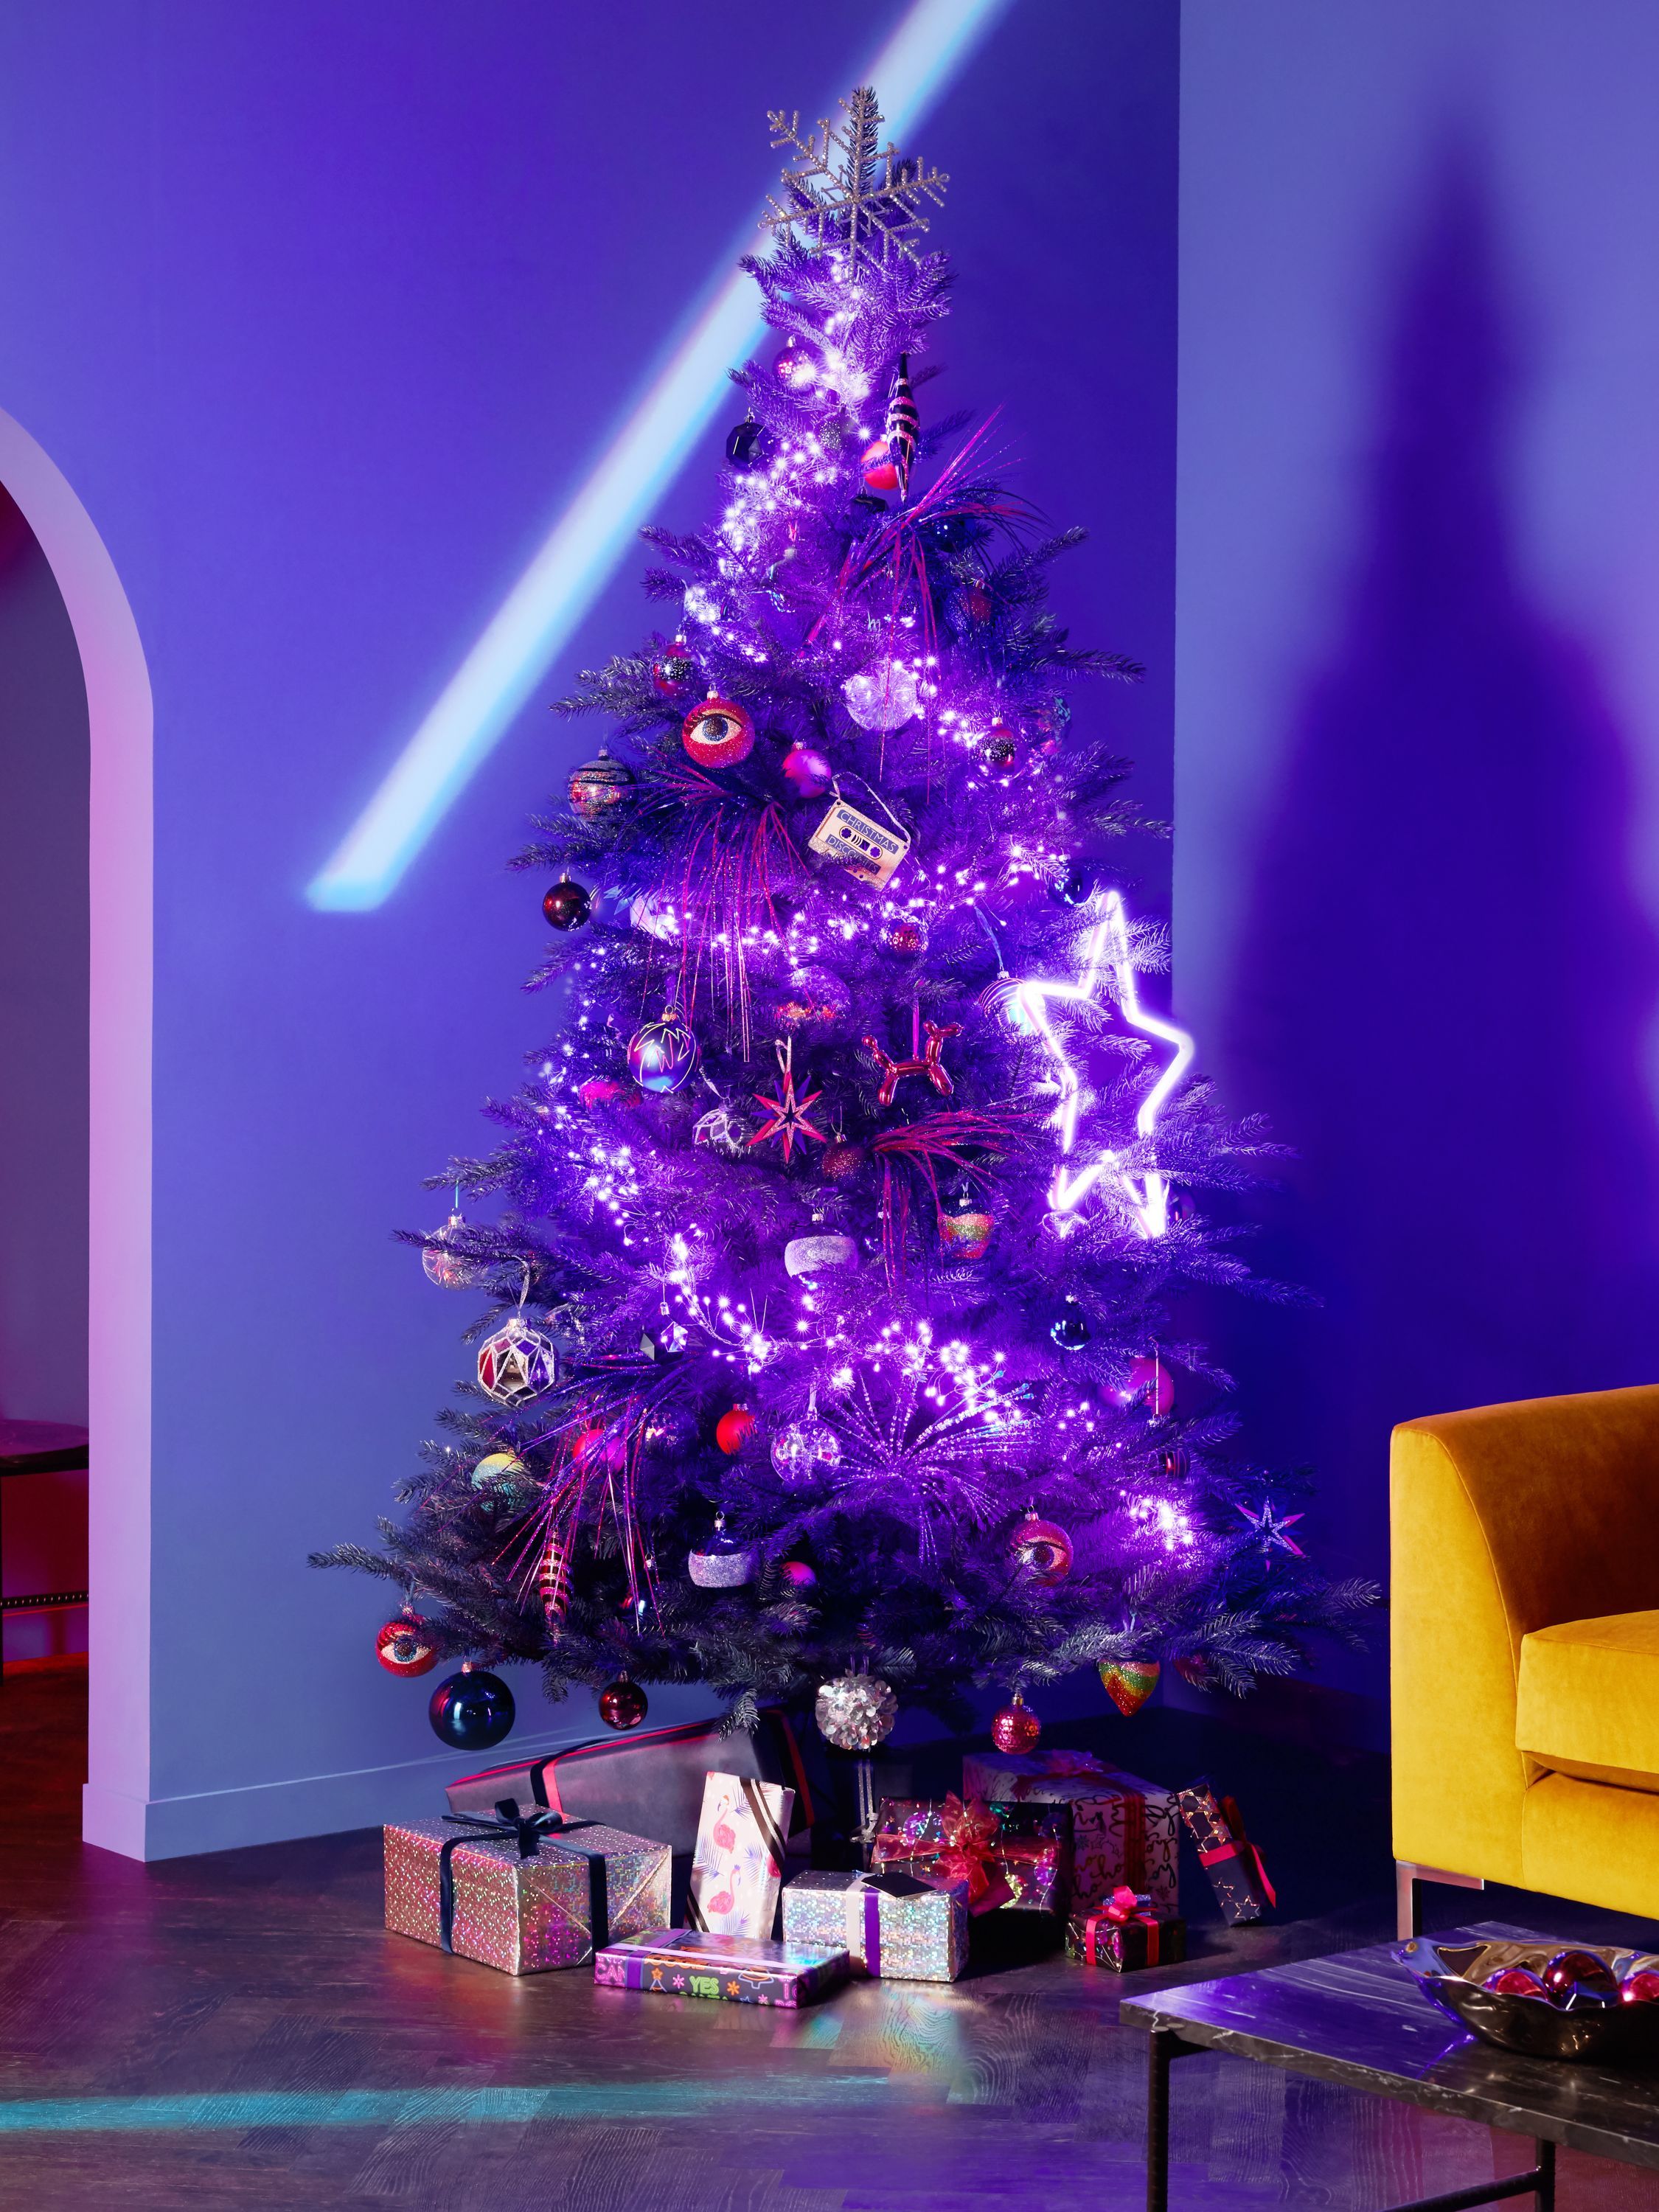 80s/90s Themed Party Tree Is Top Christmas 2019 Decorating Trend